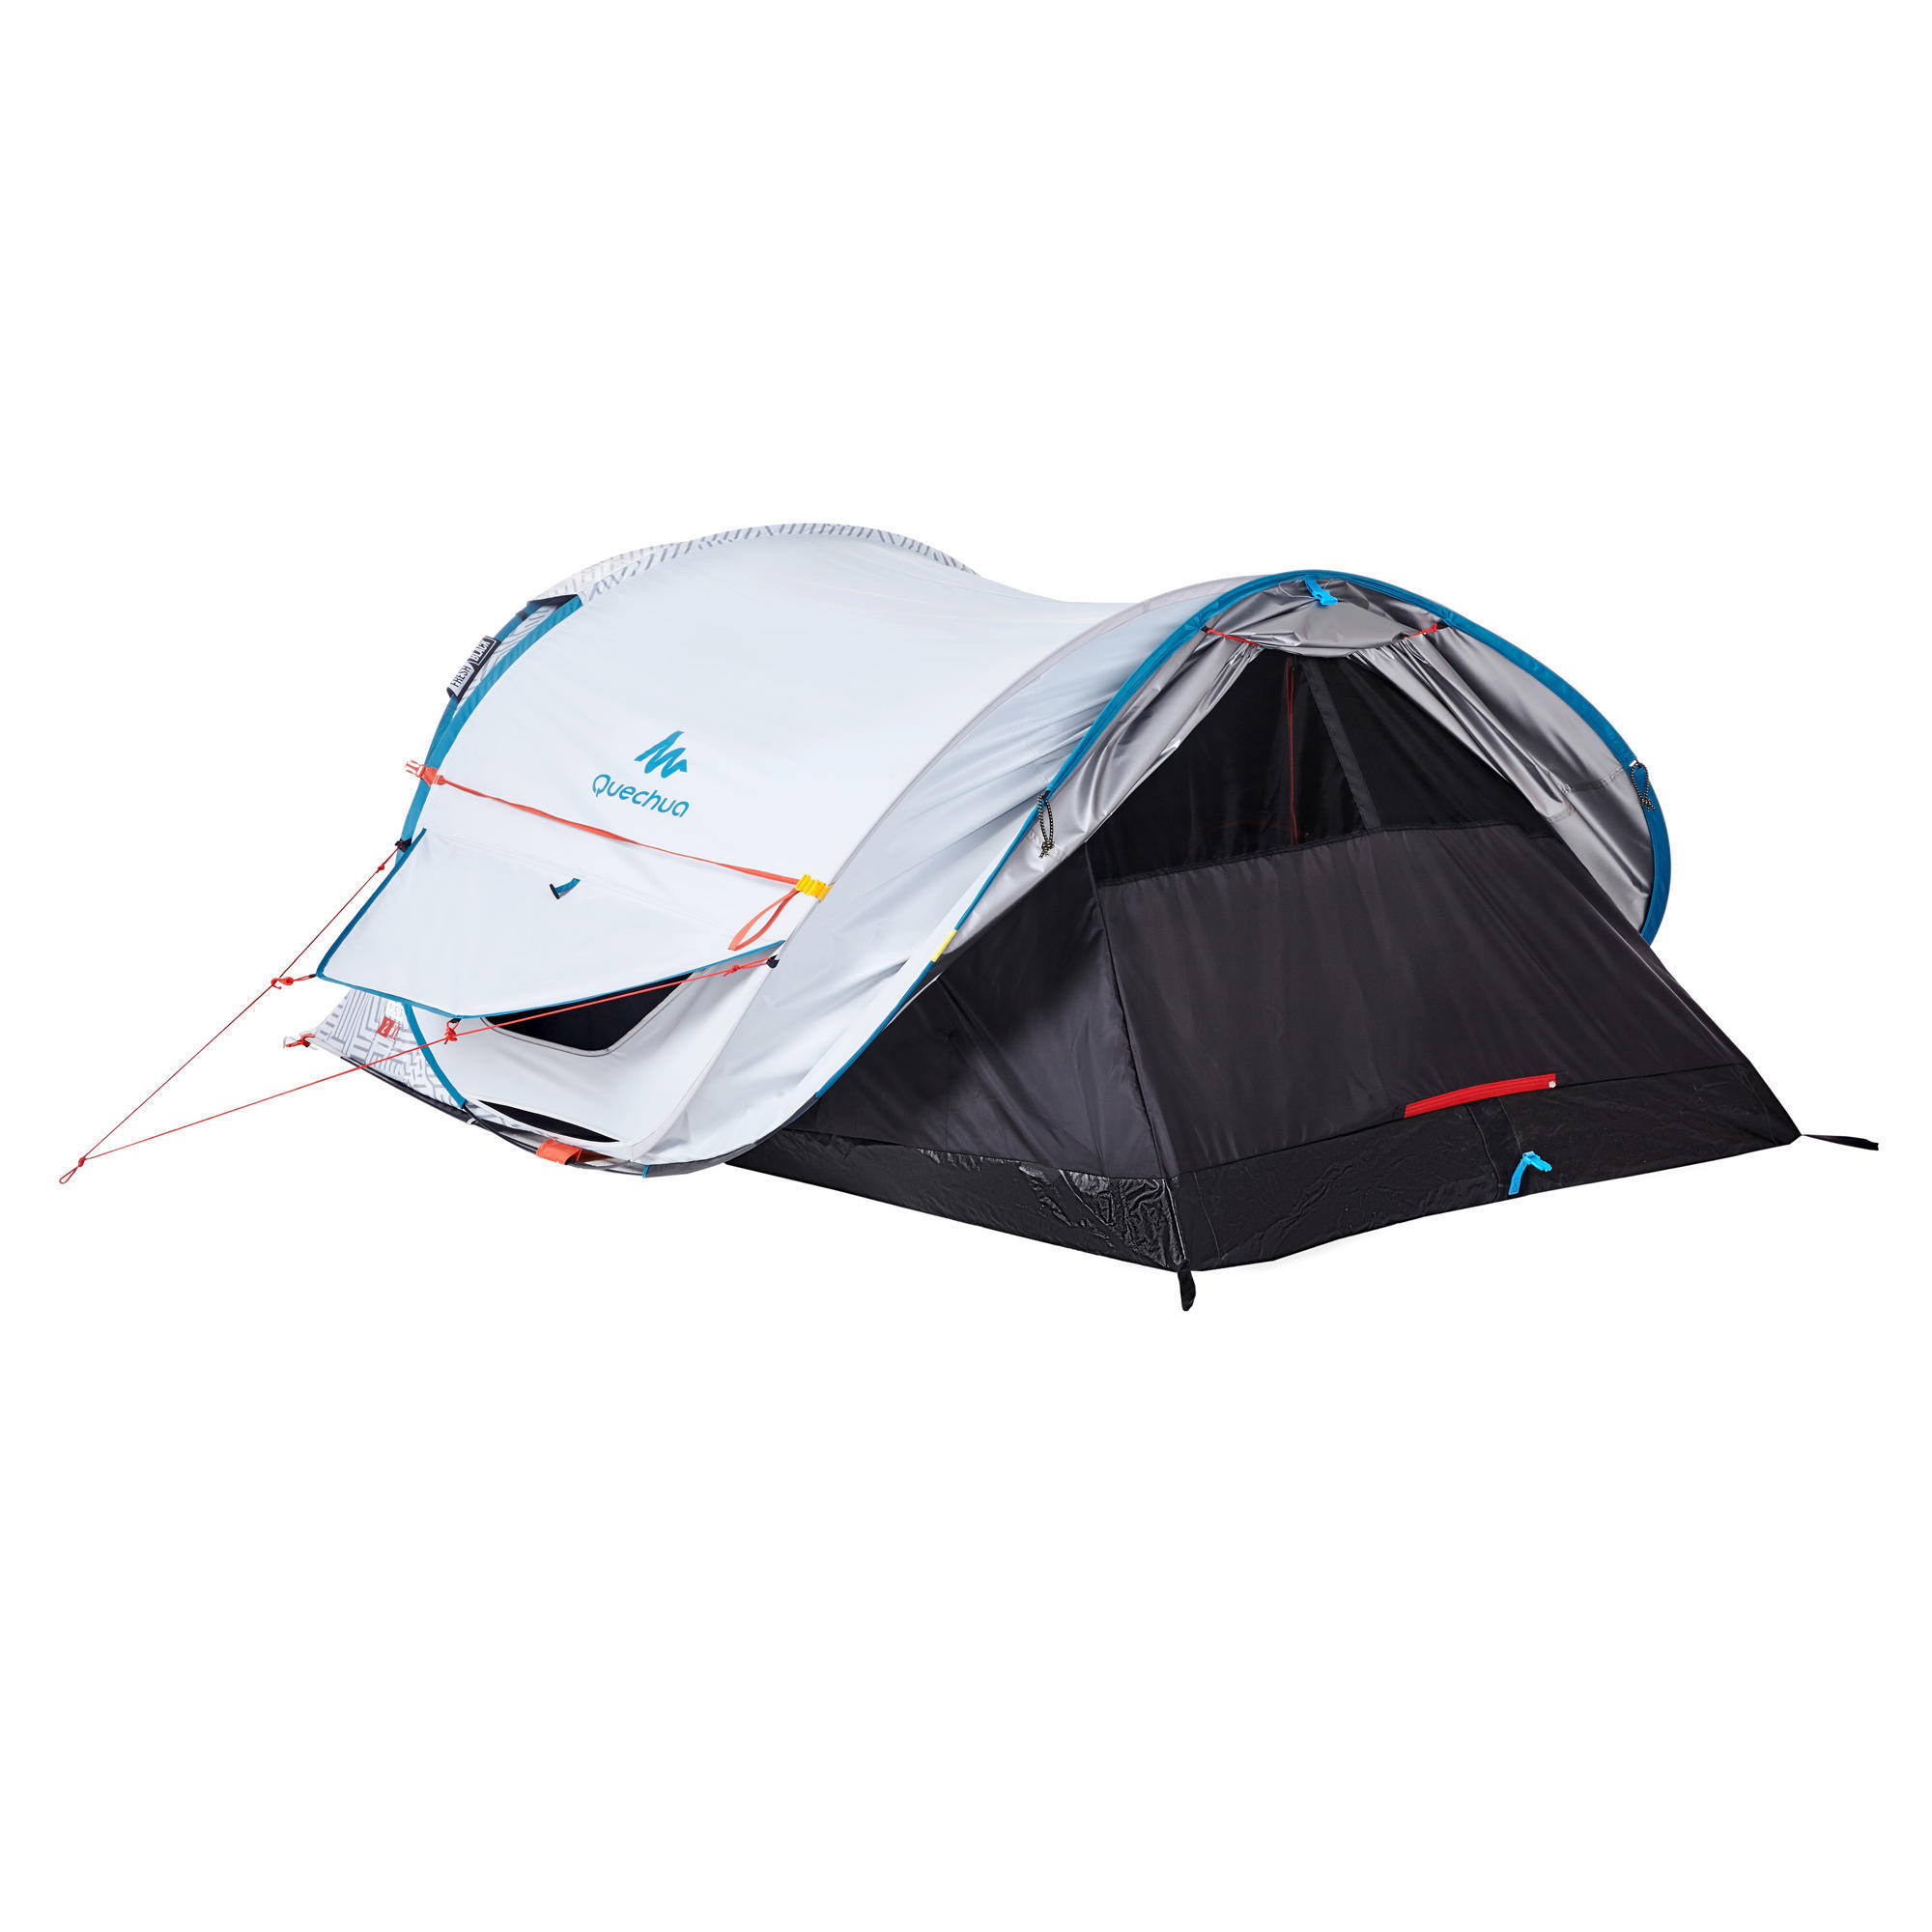 2 PERSON 2 SECONDS CAMPING TENT - FRESH 